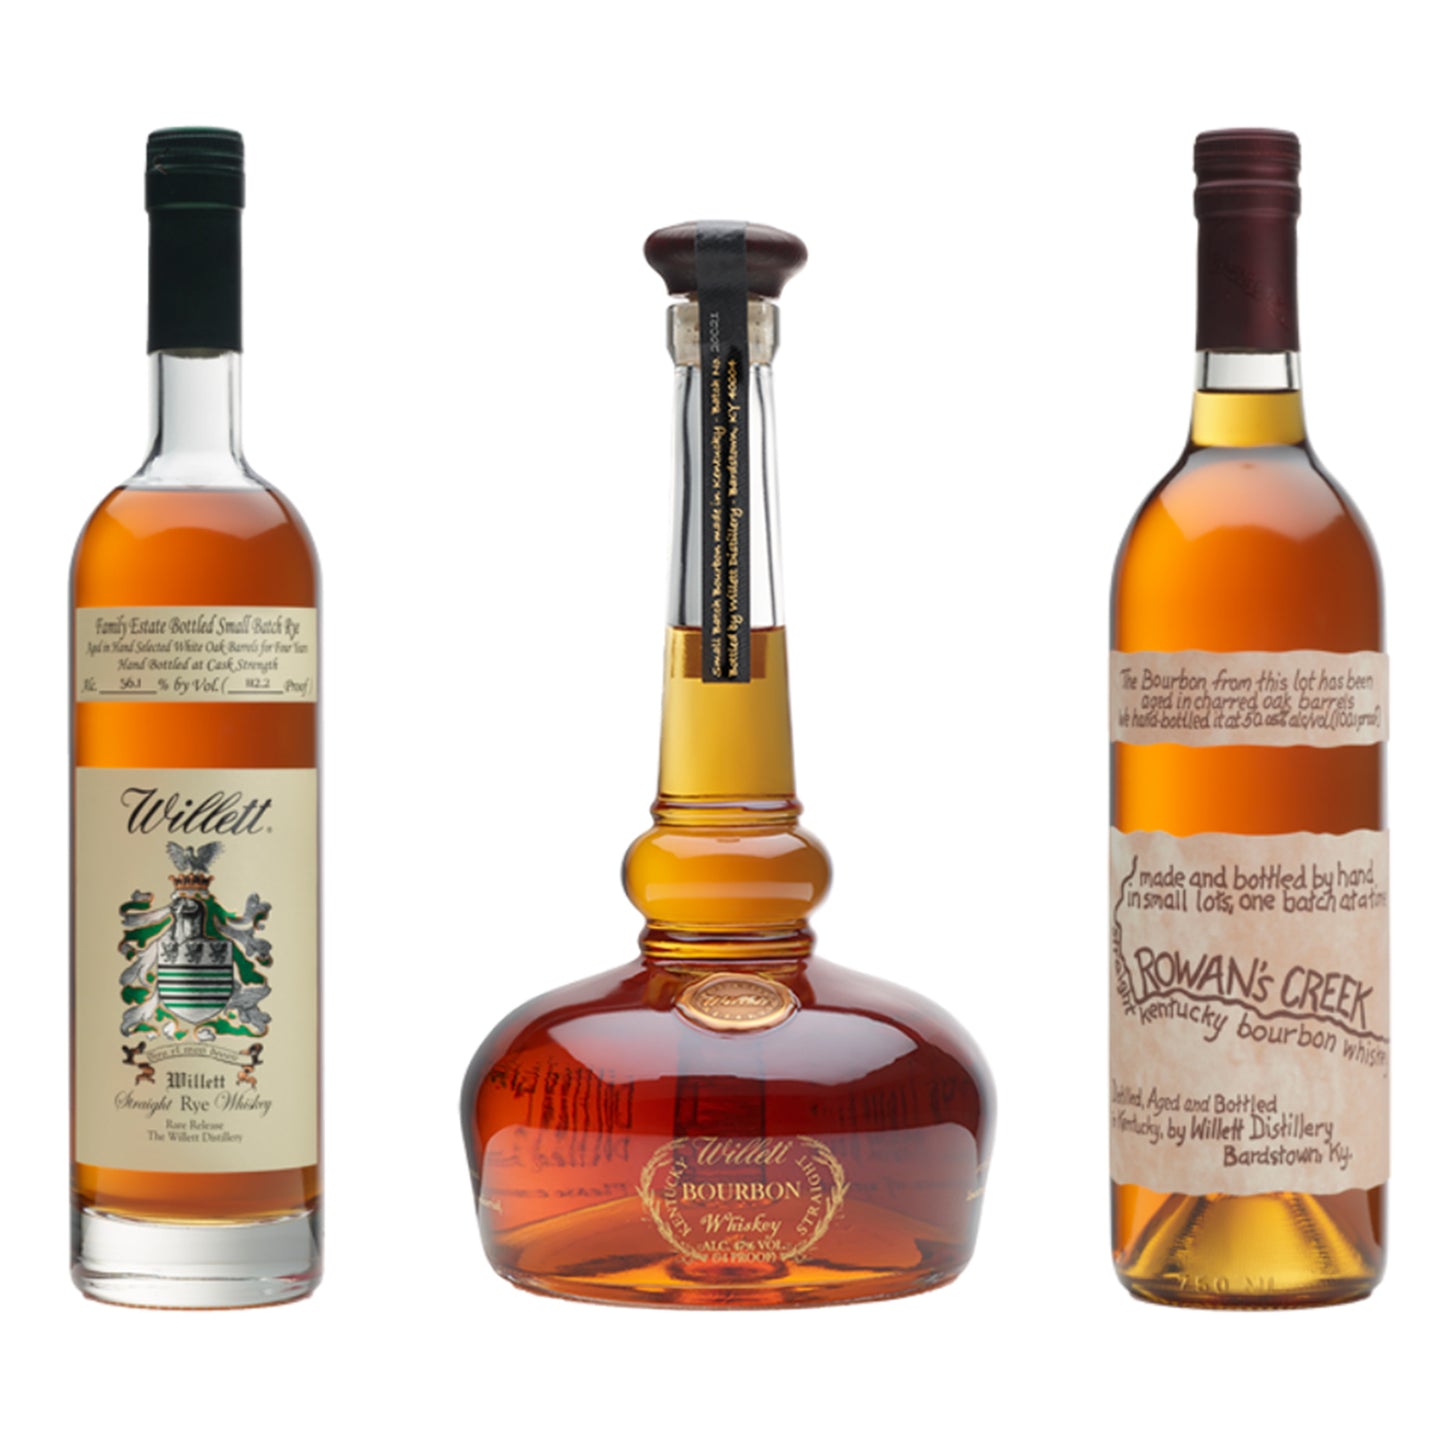 The Willet Collection - Bourbon Brothers Australia